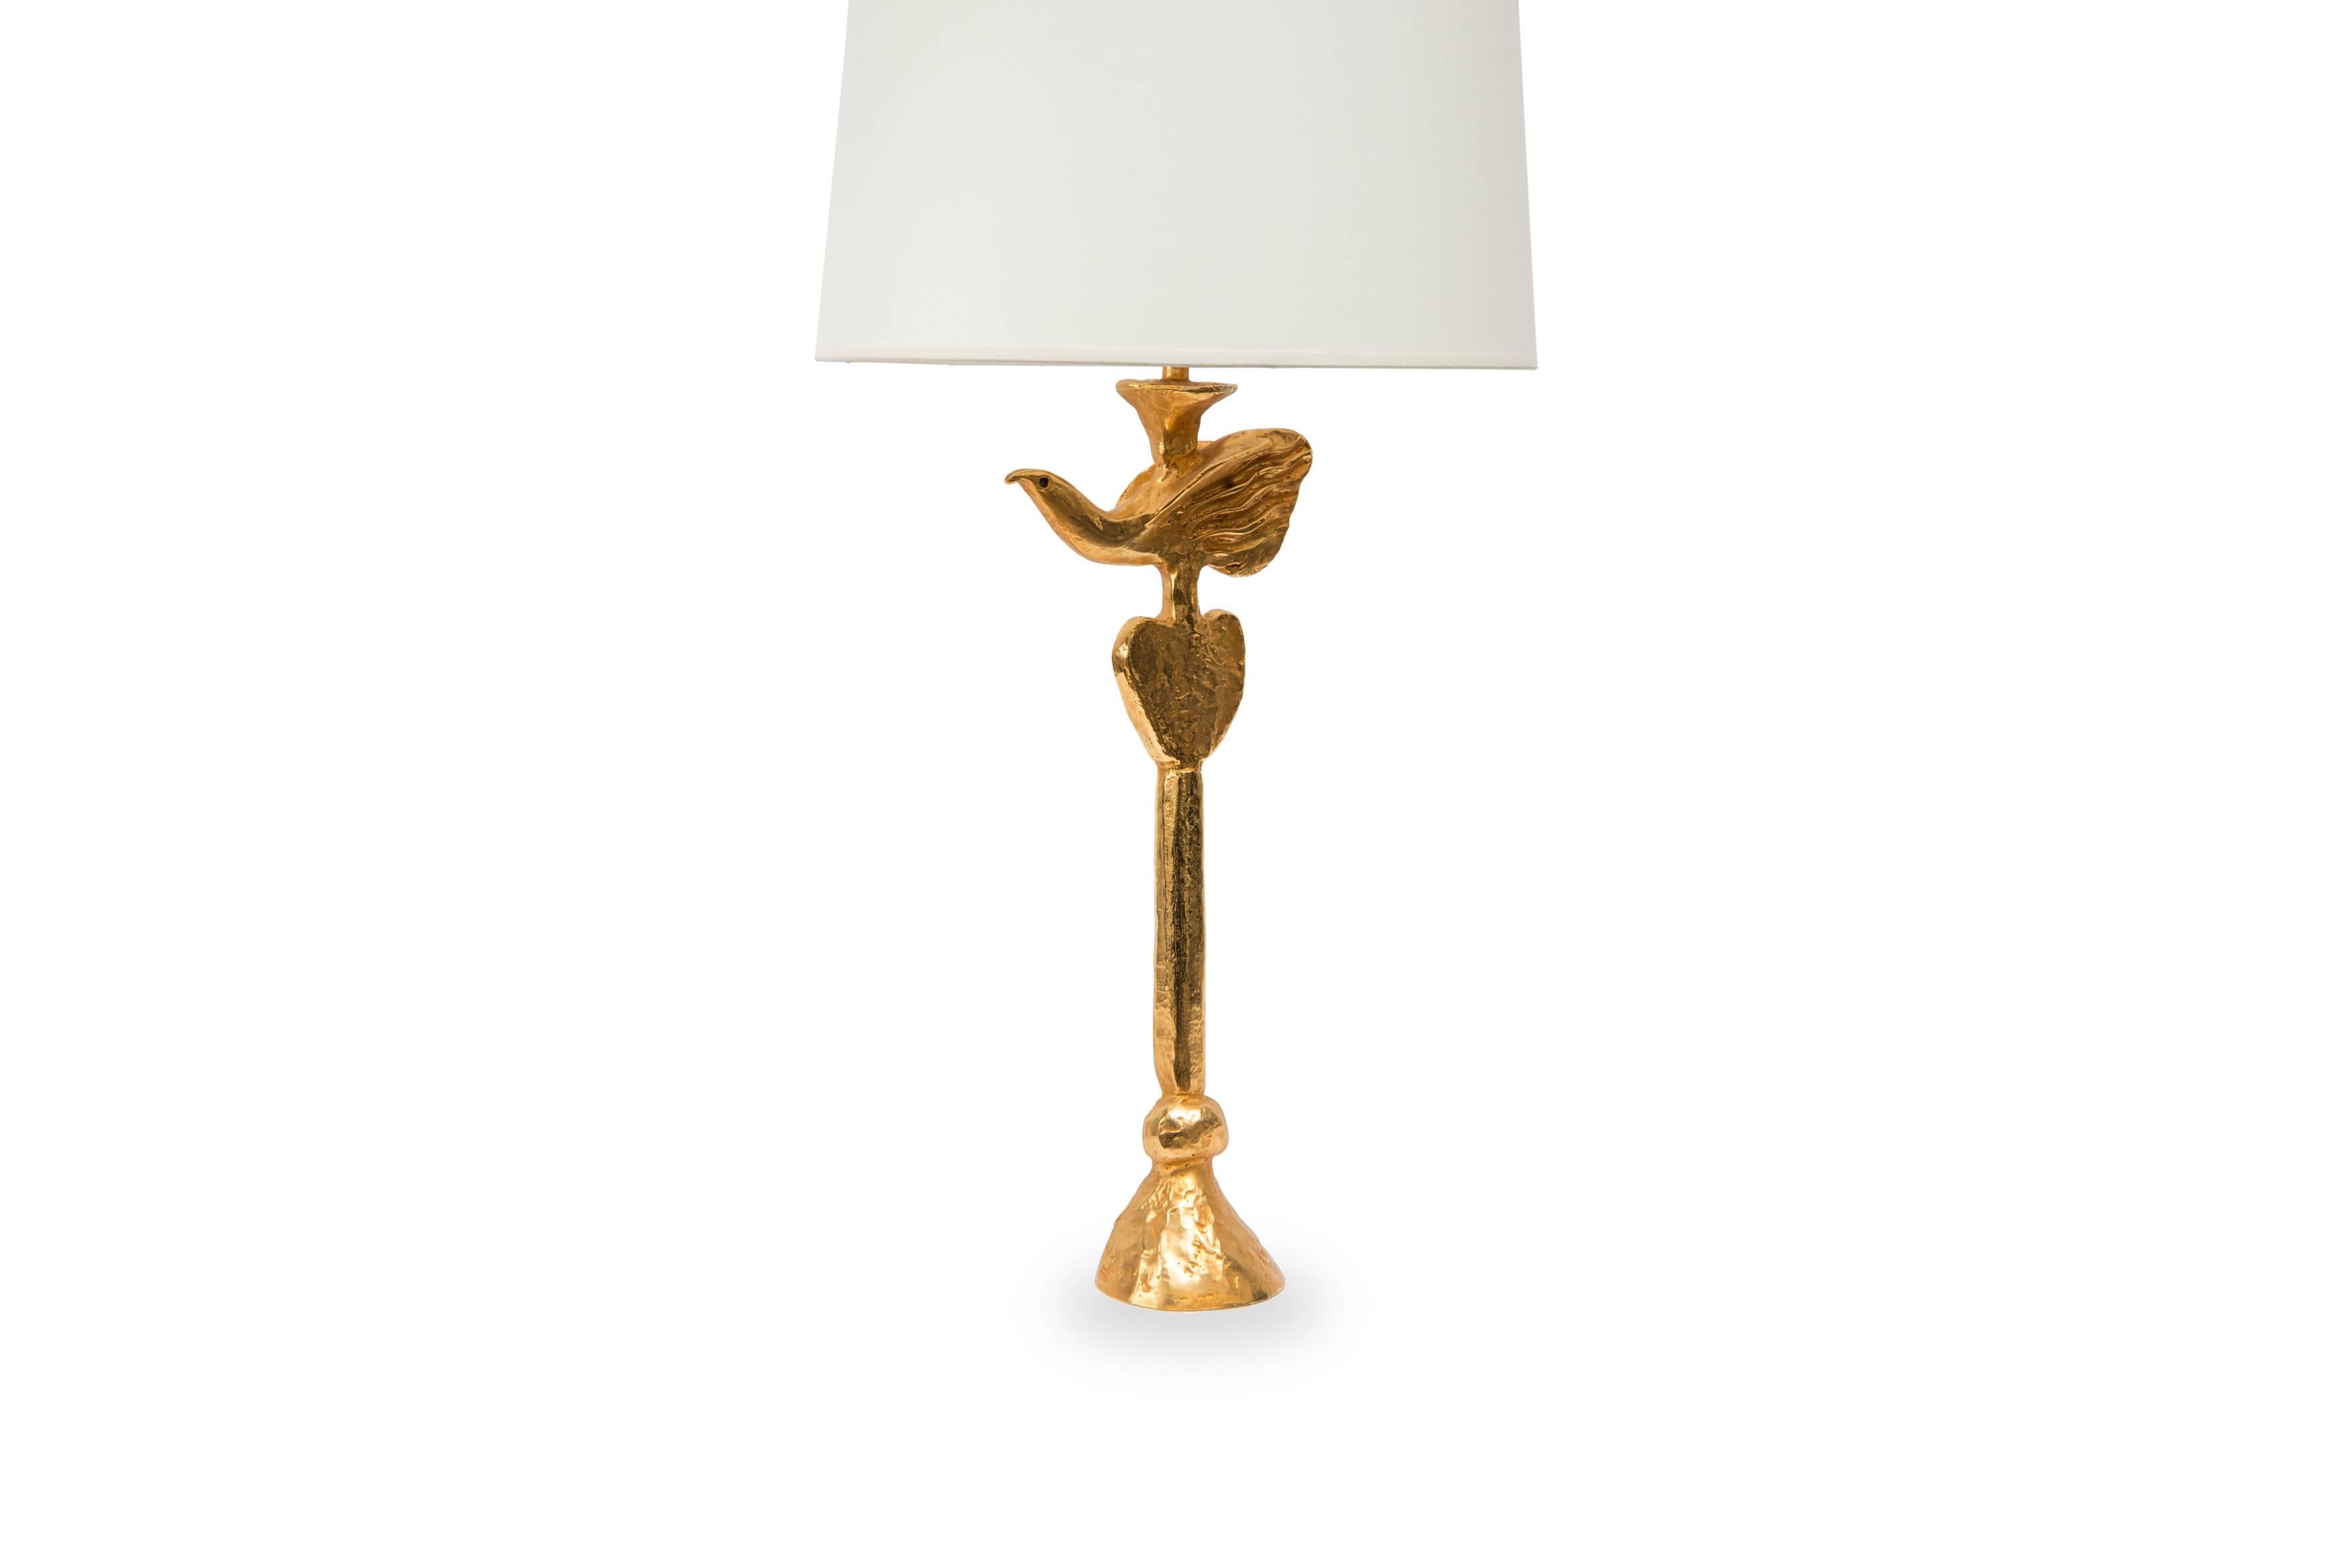 Gilded bronze table lamp representing a dove and a heart. 

Dimensions of the bronze: 
Height 45 cm (17.7in).

Designed by Pierre Casenove
Edited by Fondica

France, circa 1990.